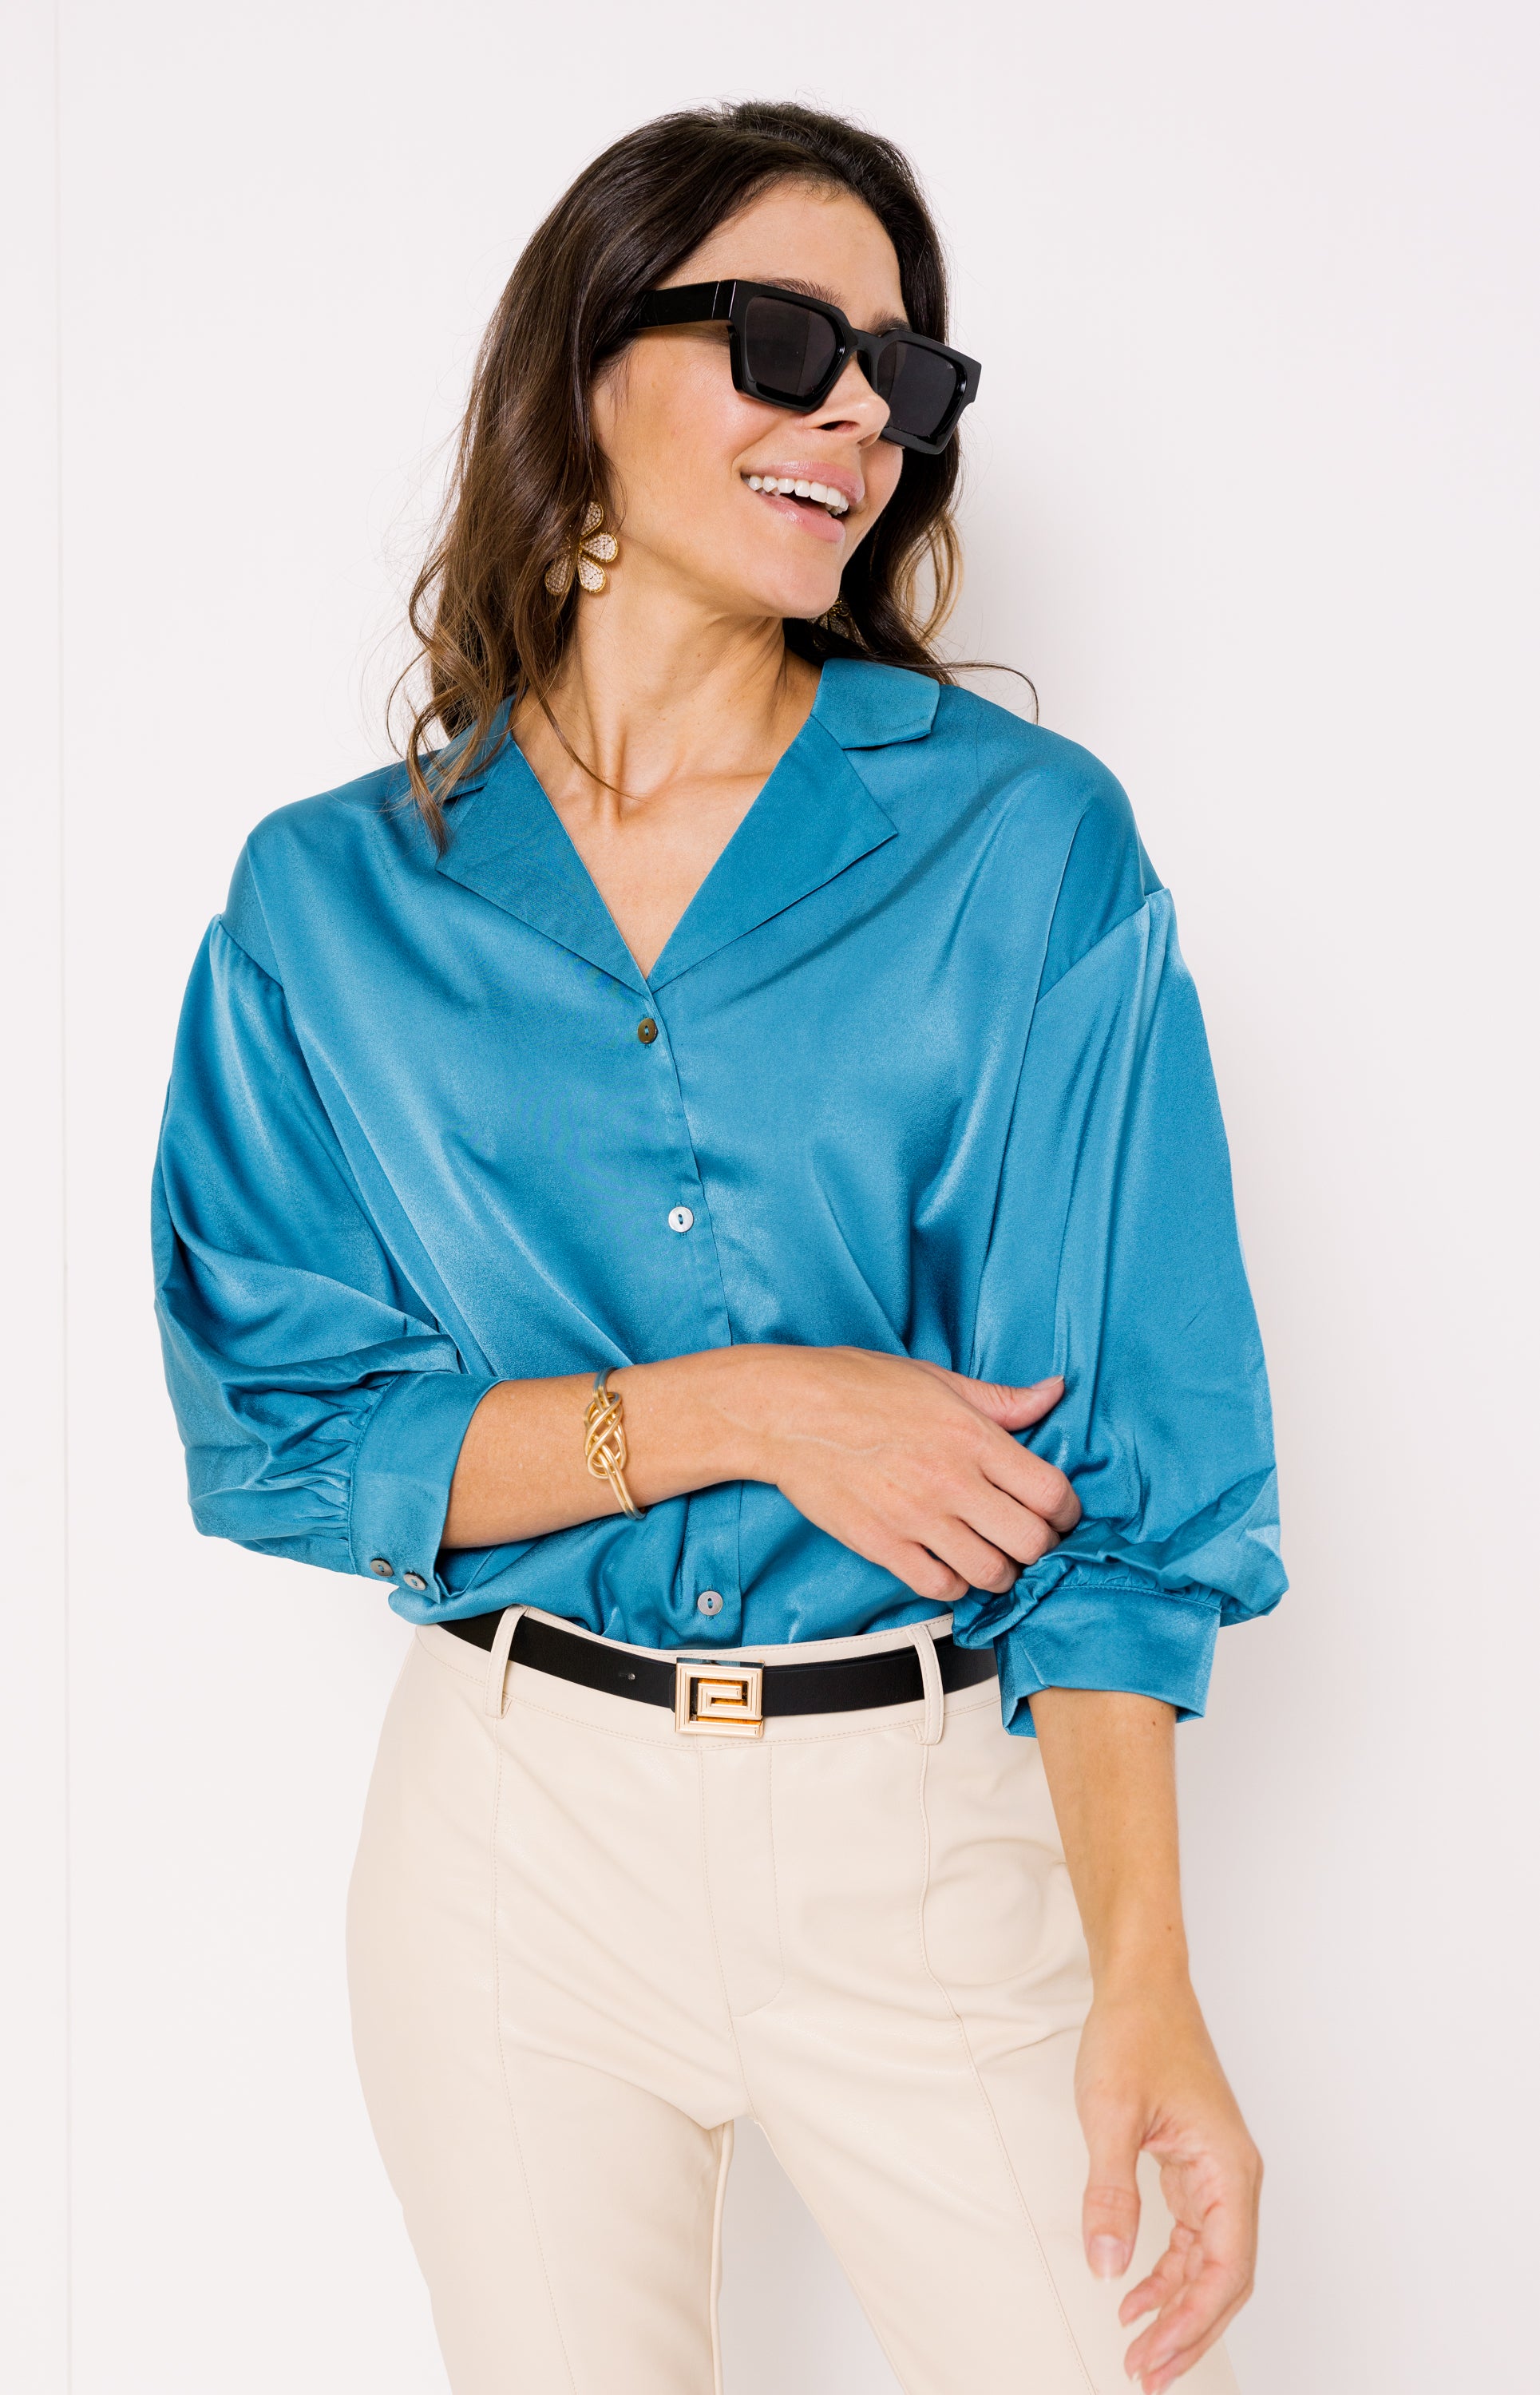 Waiting for You Blouse, TEAL BLUE